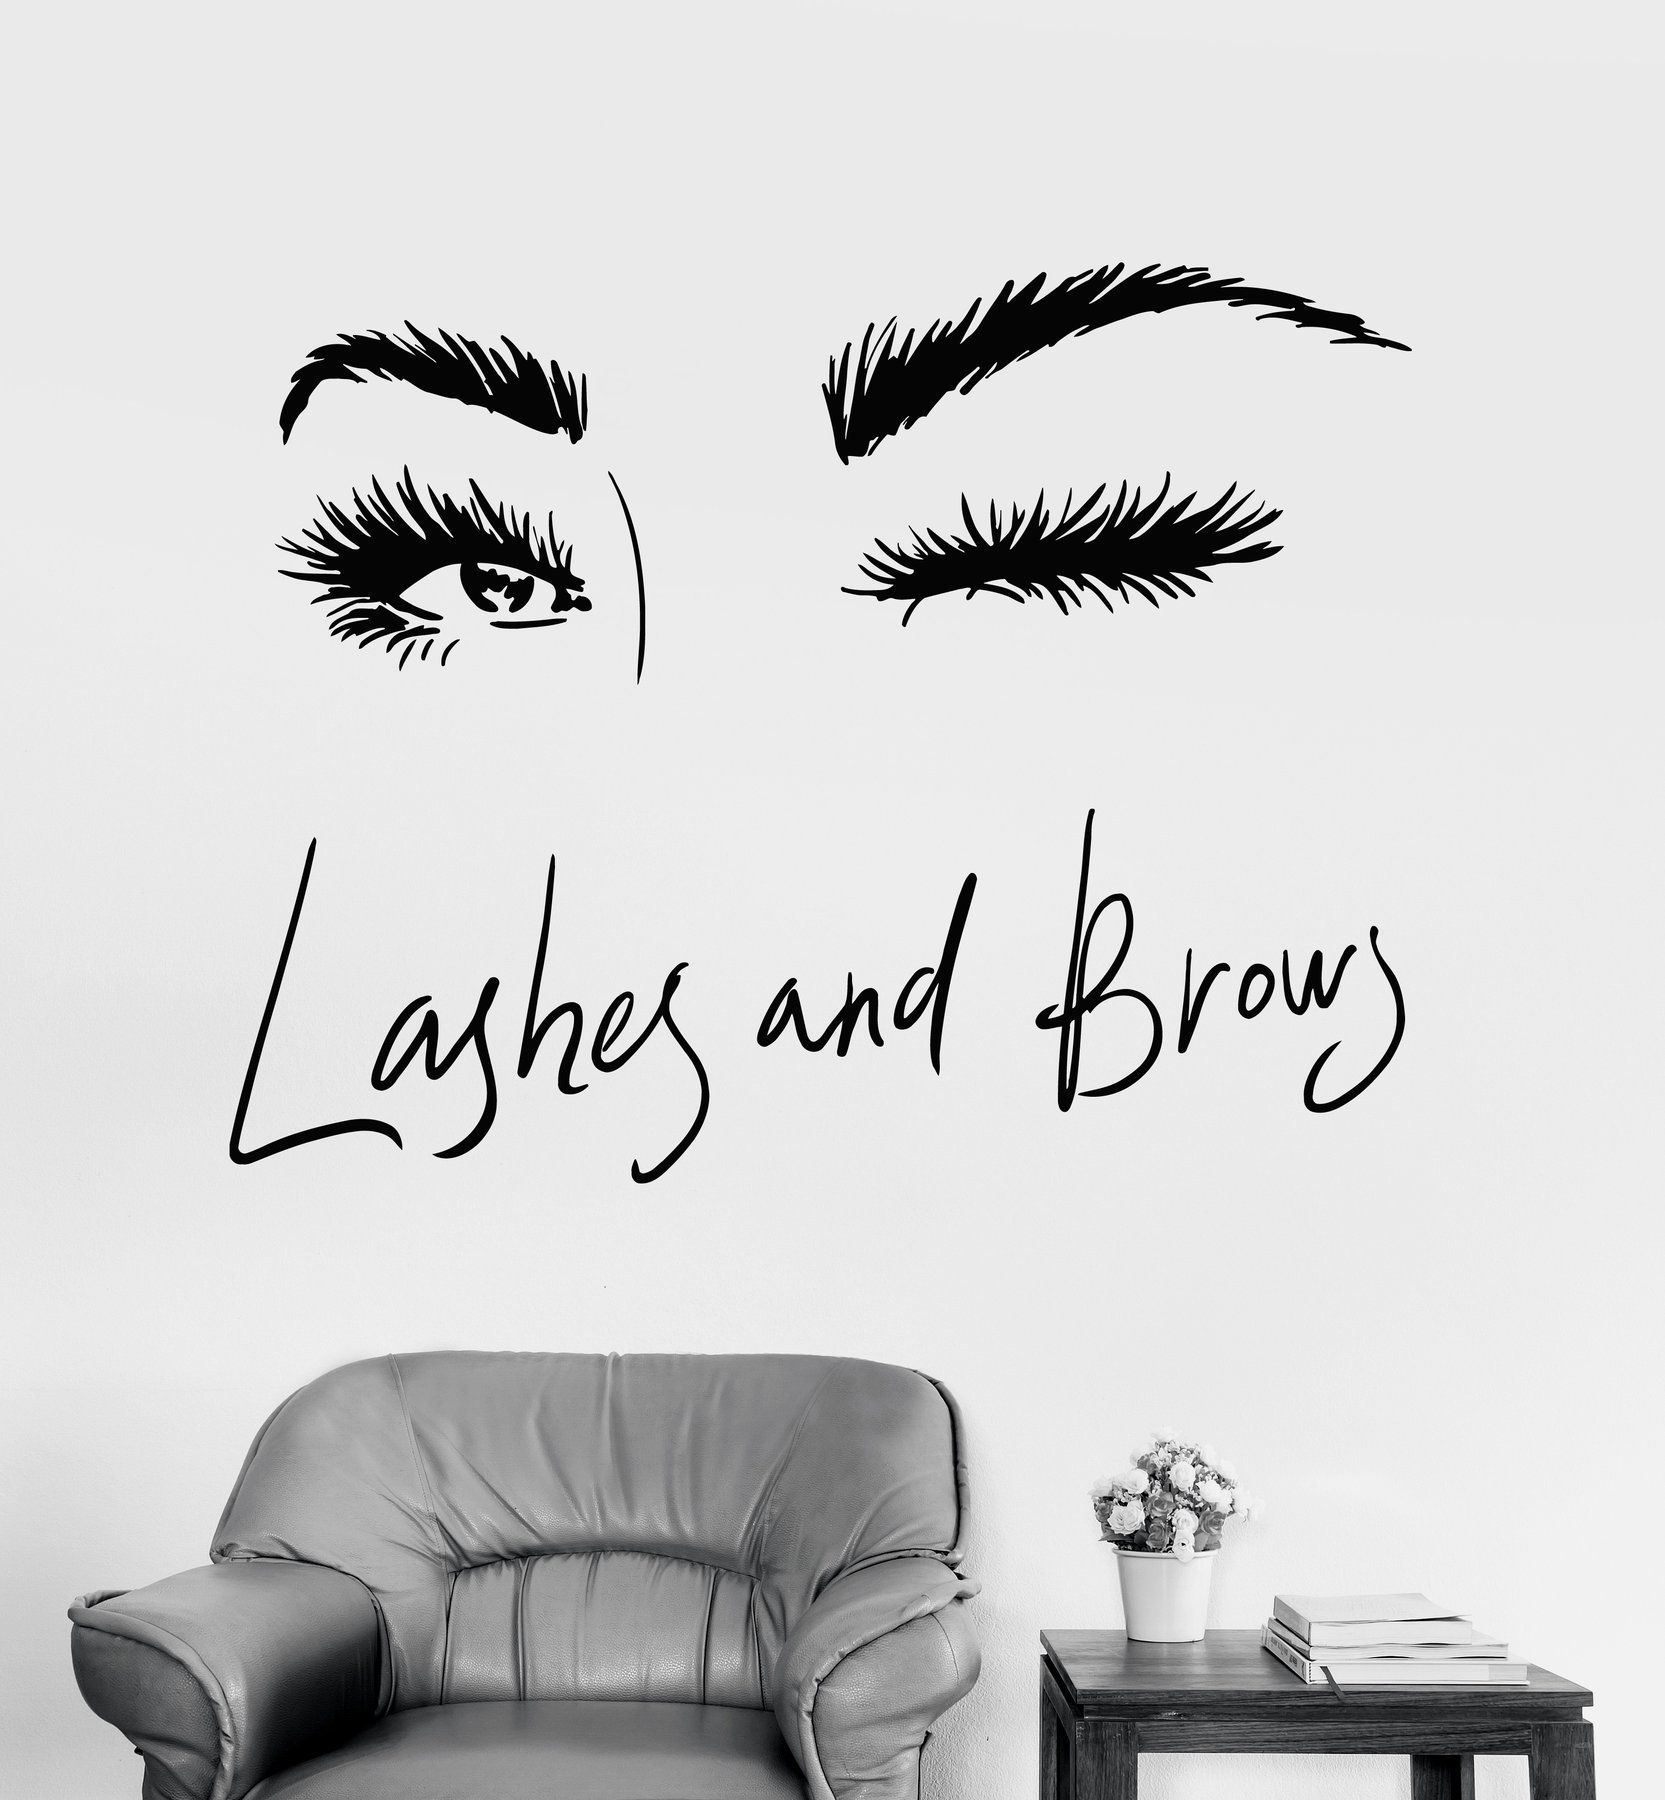 Vinyl Wall Decal Sexy Girl Eyes Eyelashes Brows Beauty Salon Eye Wink Stickers Unique Gift (1794ig)L 28.5 in X 36.75 in / Black - Vinyl Wall Decal Sexy Girl Eyes Eyelashes Brows Beauty Salon Eye Wink Stickers Unique Gift (1794ig)L 28.5 in X 36.75 in / Black -   16 beauty Therapy design ideas